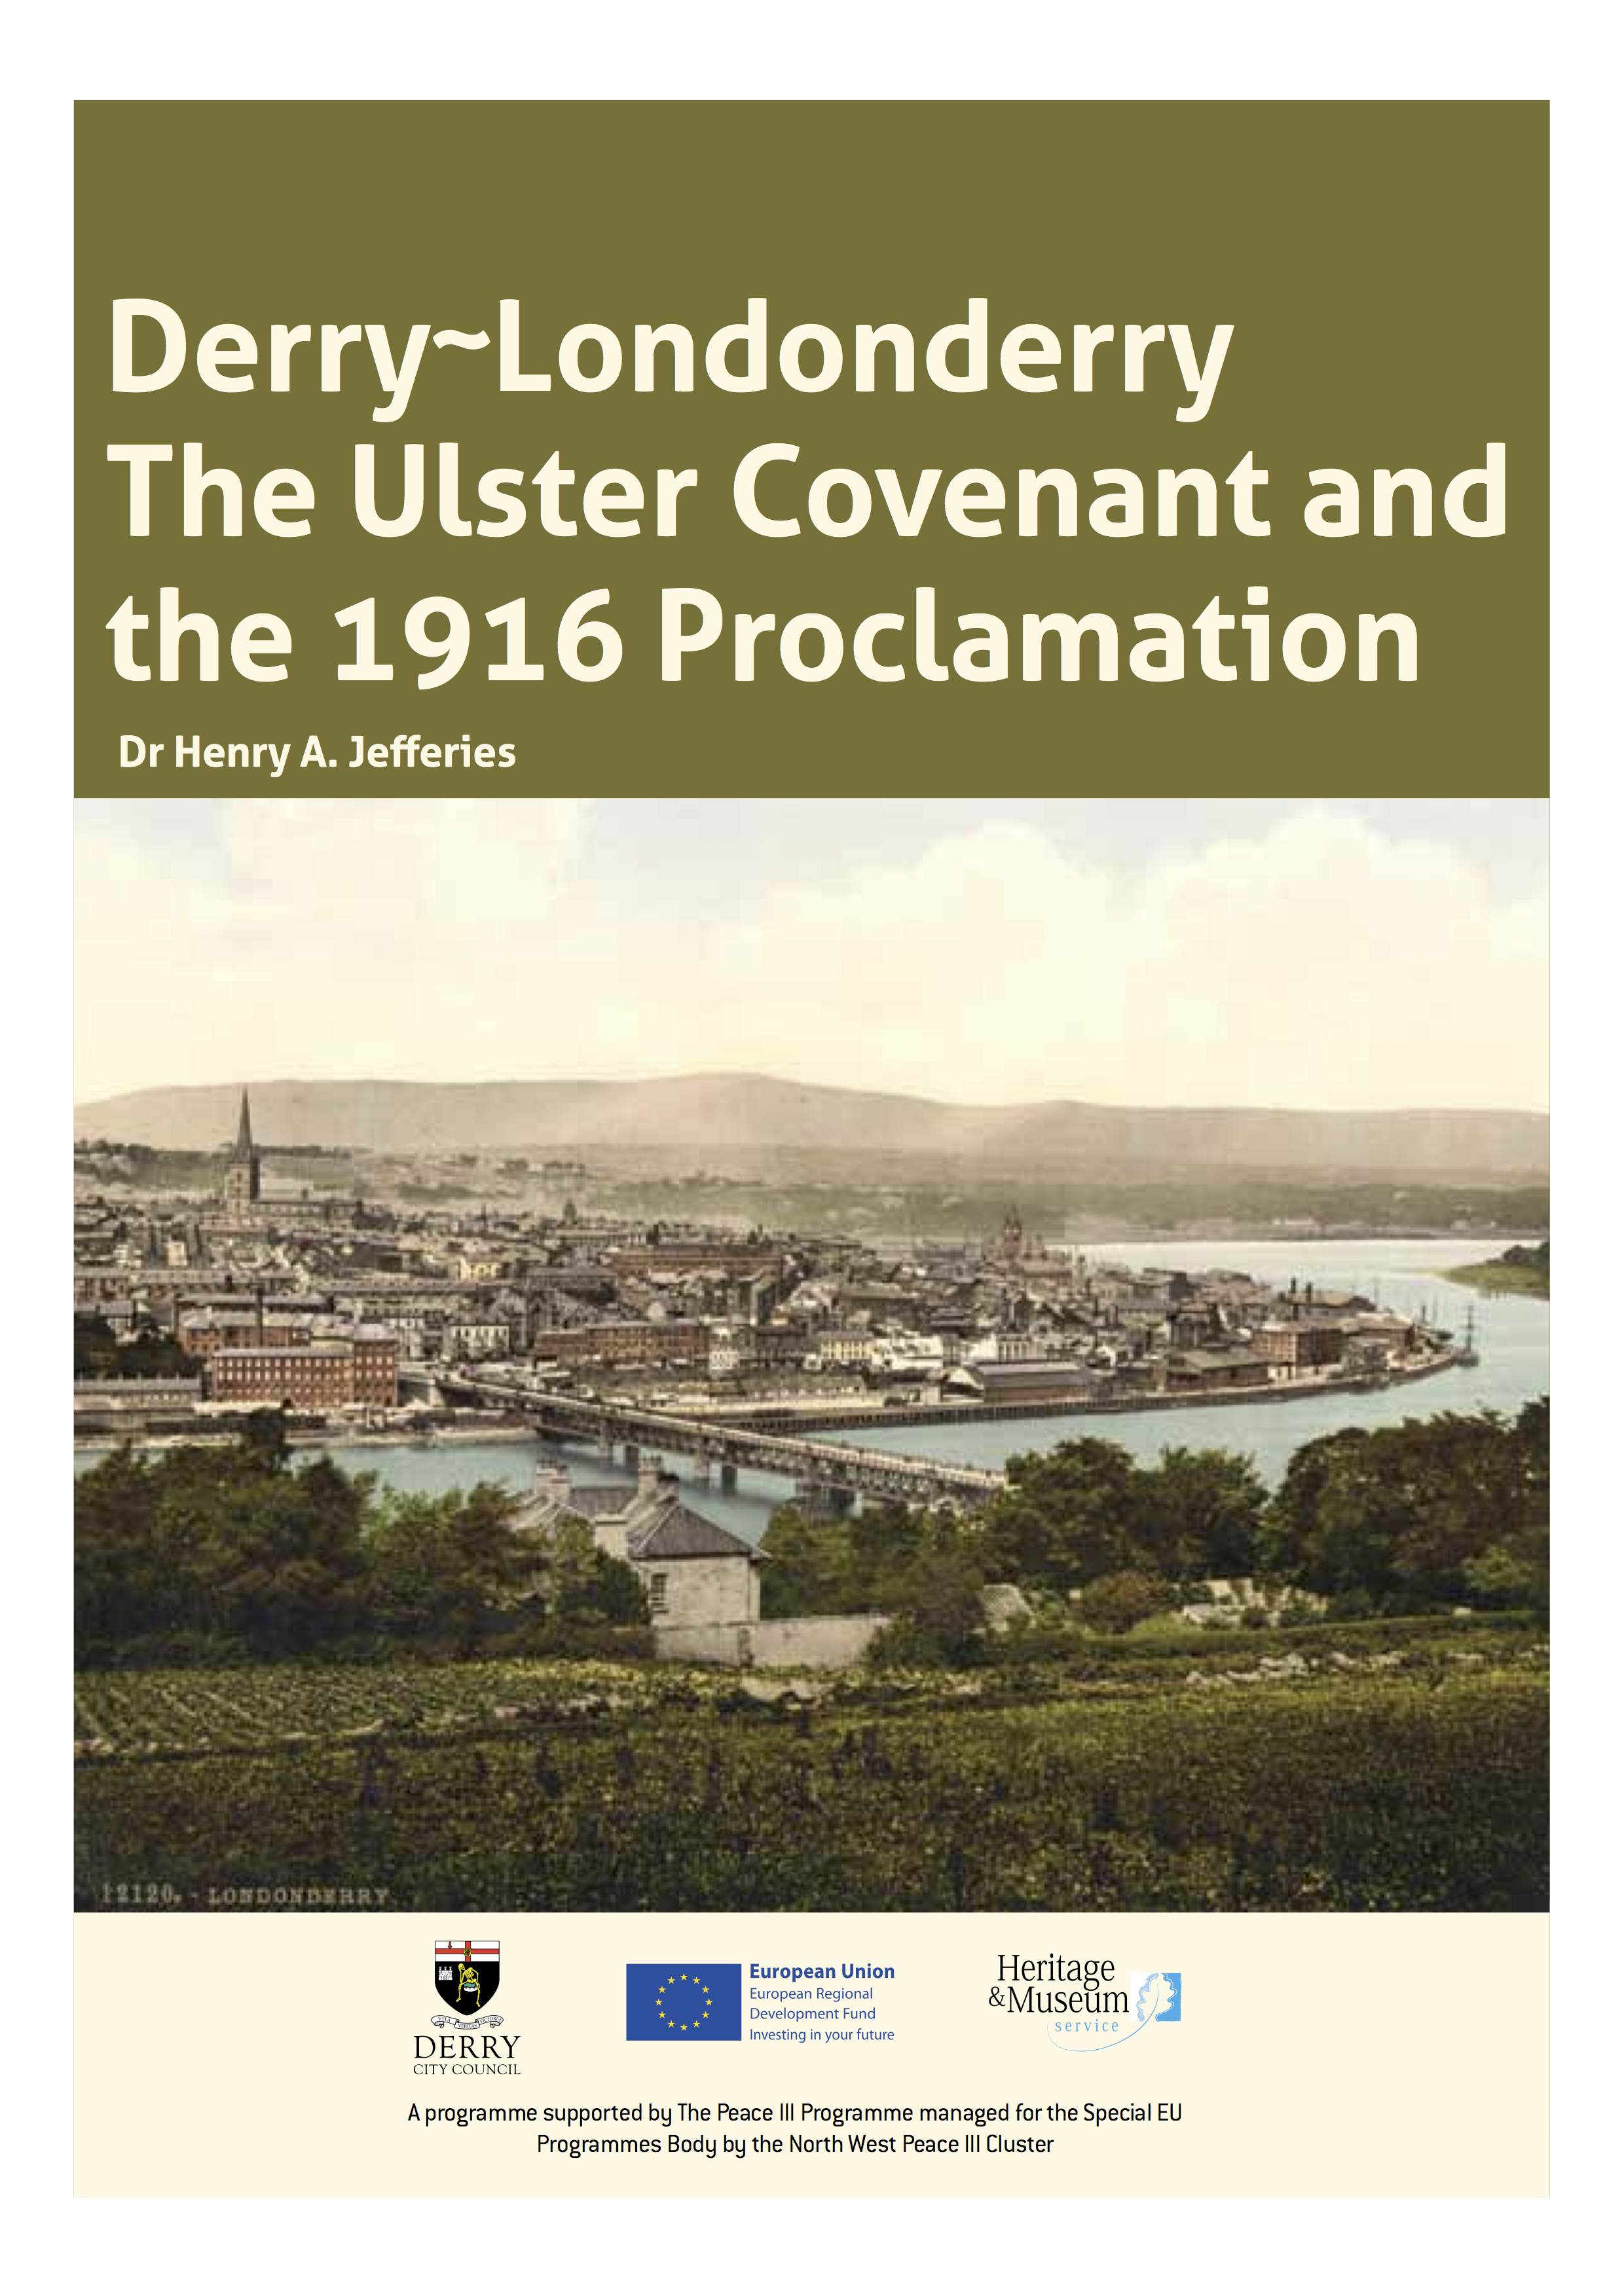 Derry City Council information booklets